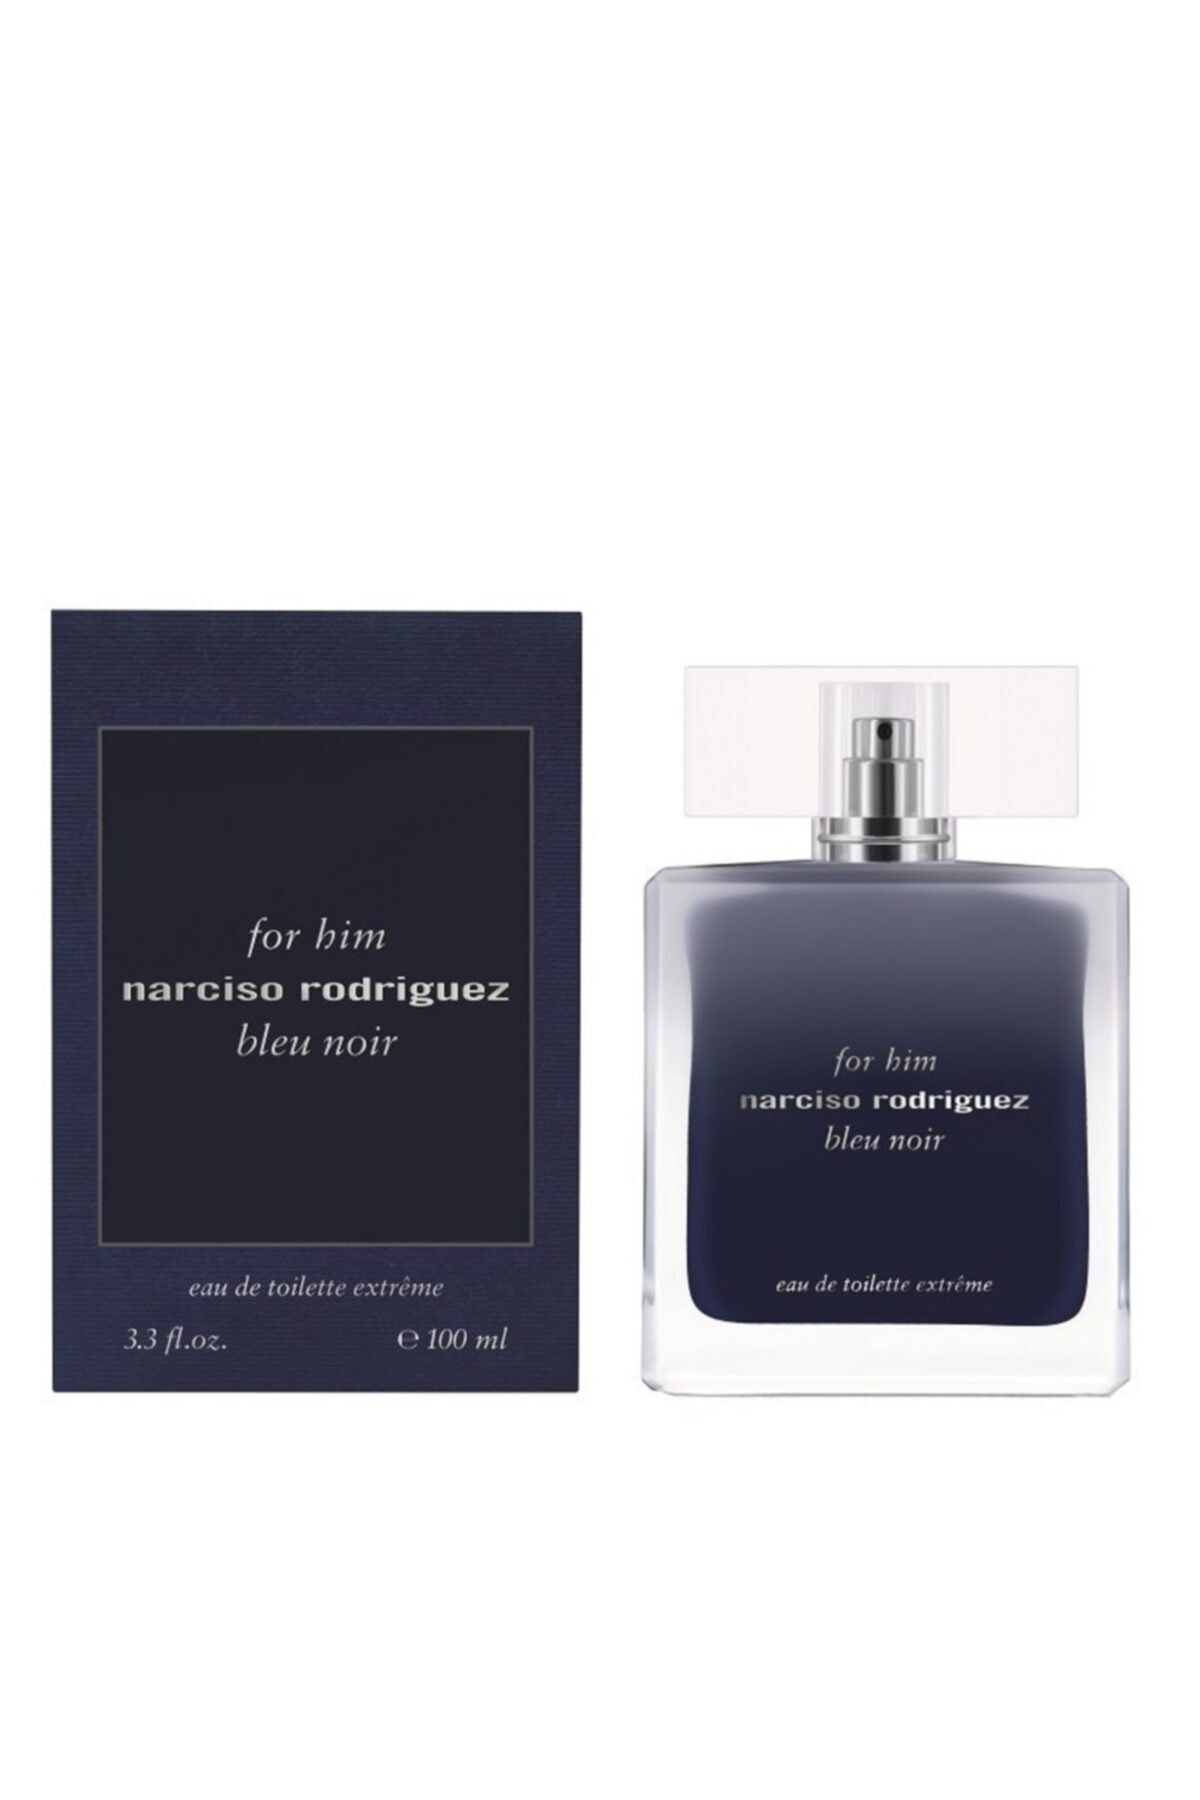 Narciso rodriguez for him bleu. N. Rodriguez for him Blue Noir m EDP 50 ml. Narciso Rodriguez bleu Noir for him EDT 100 ml. Narciso Rodriguez for him bleu Noir. Narciso Rodriguez for him bleu Noir Toilette extreme.